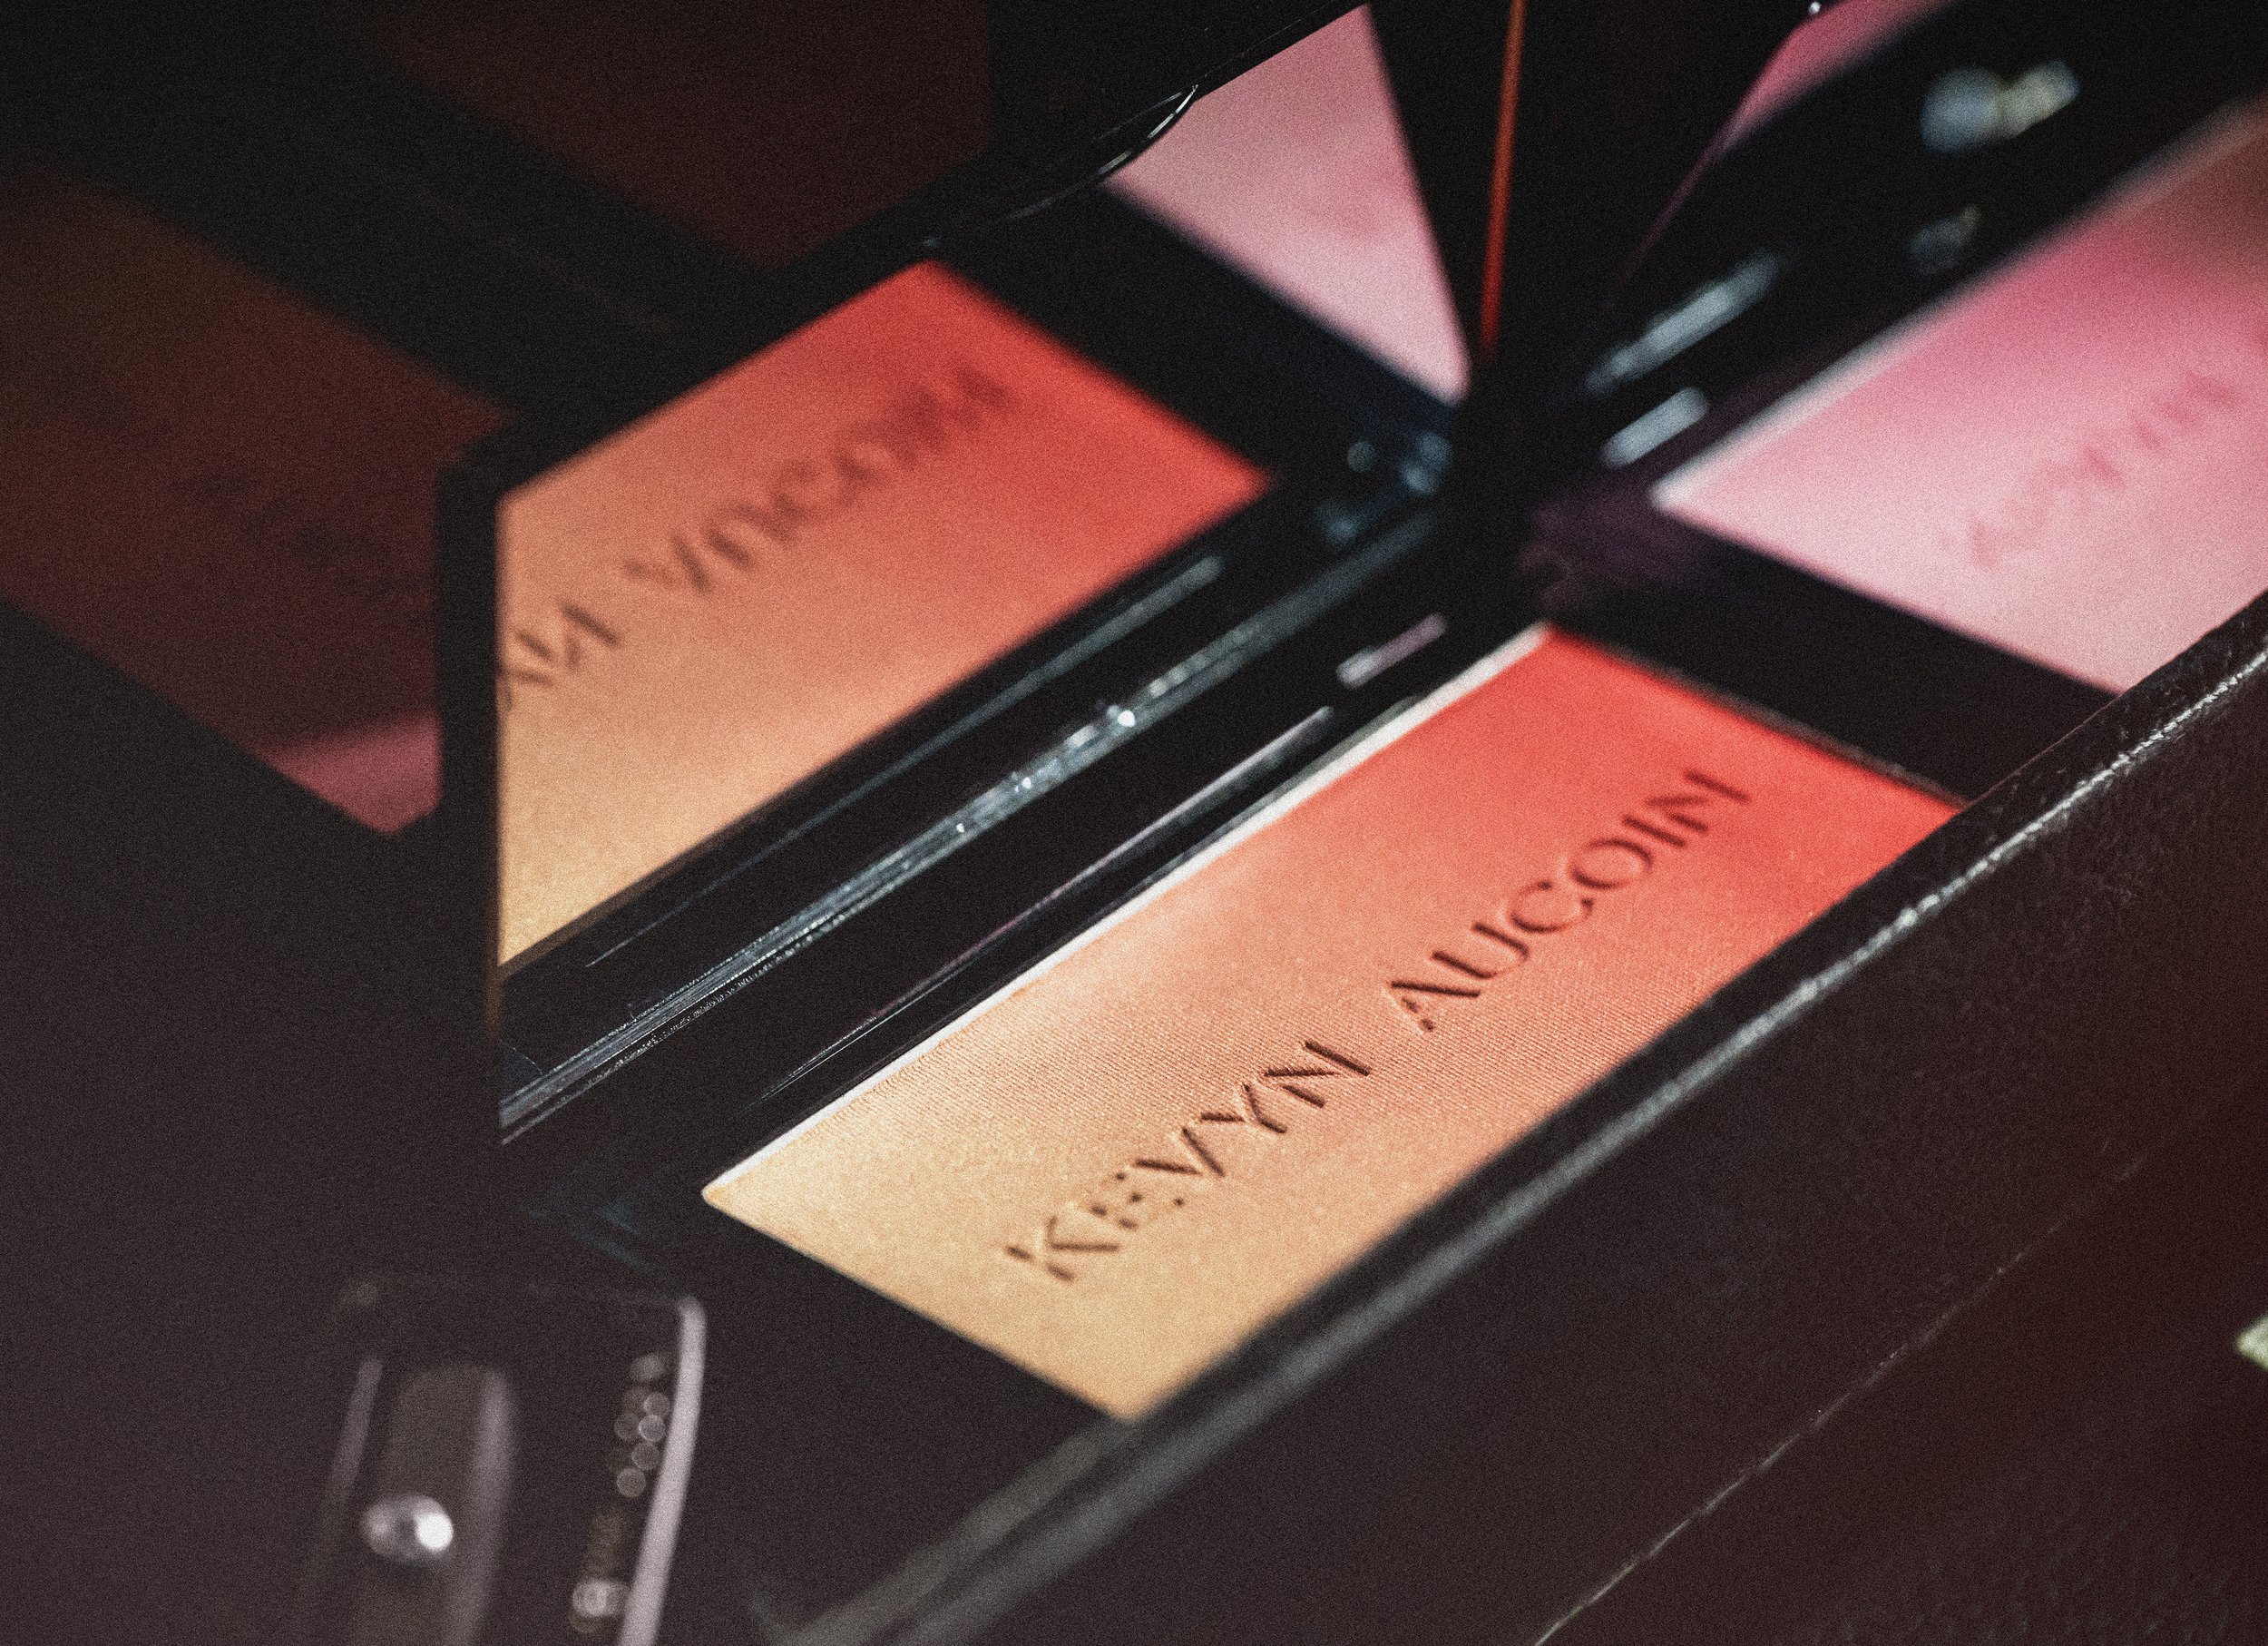 Kevyn Aucoin Legacy Makeup product photography - photo by Andrew Werner.jpg